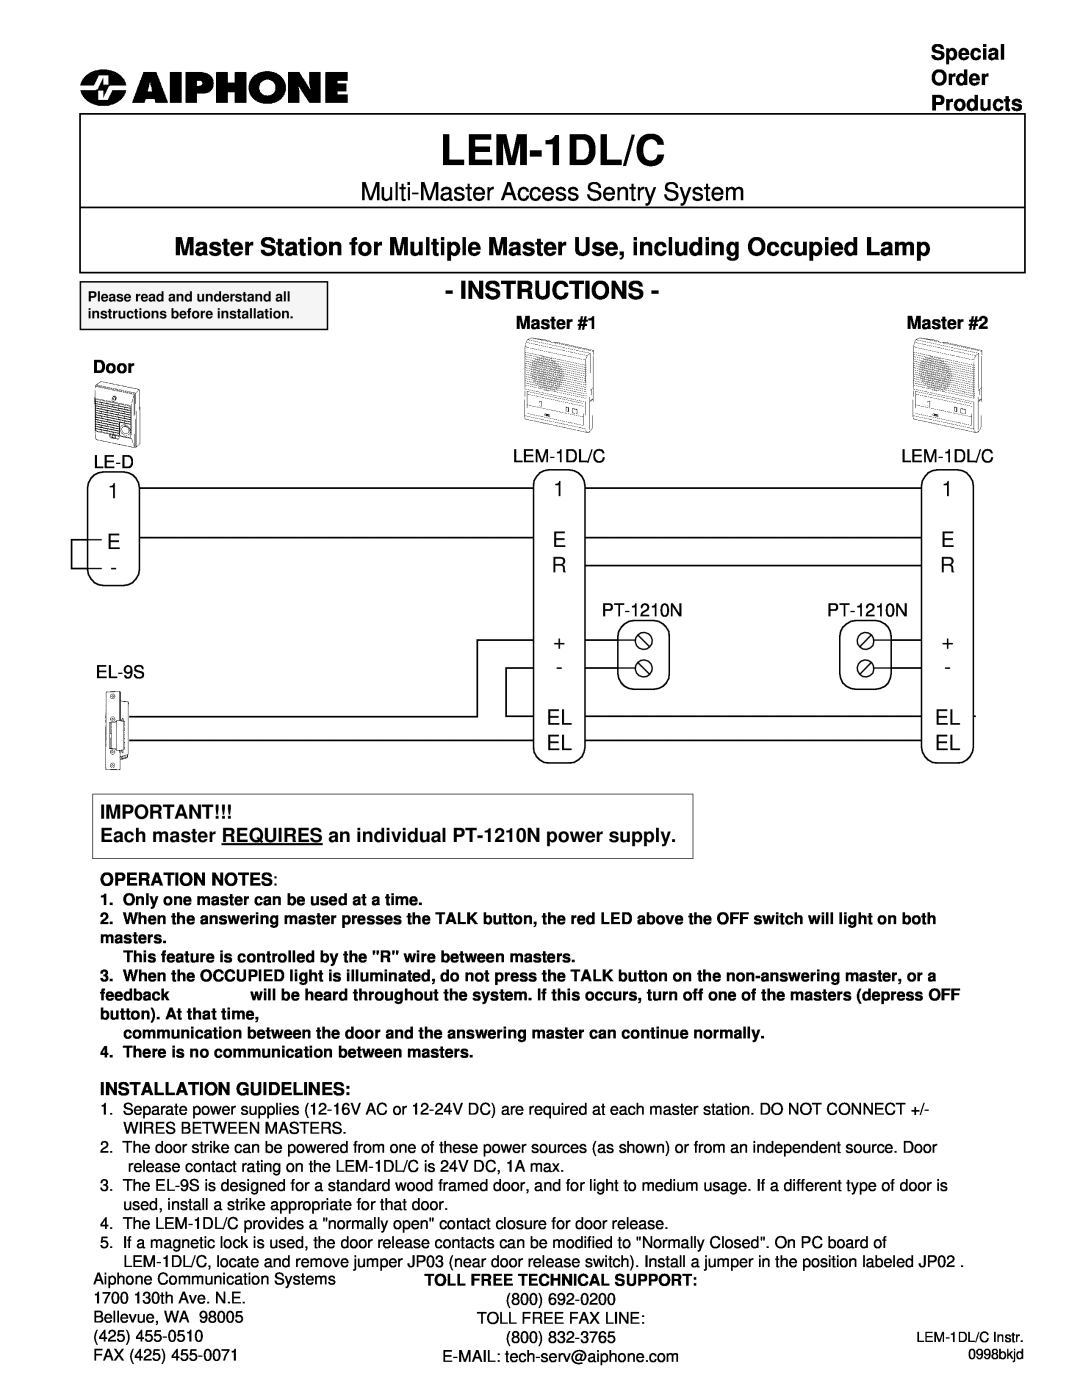 Aiphone installation manual LEM-1DLSupplemental Instructions, Single Master Station with Door Release, the door release 